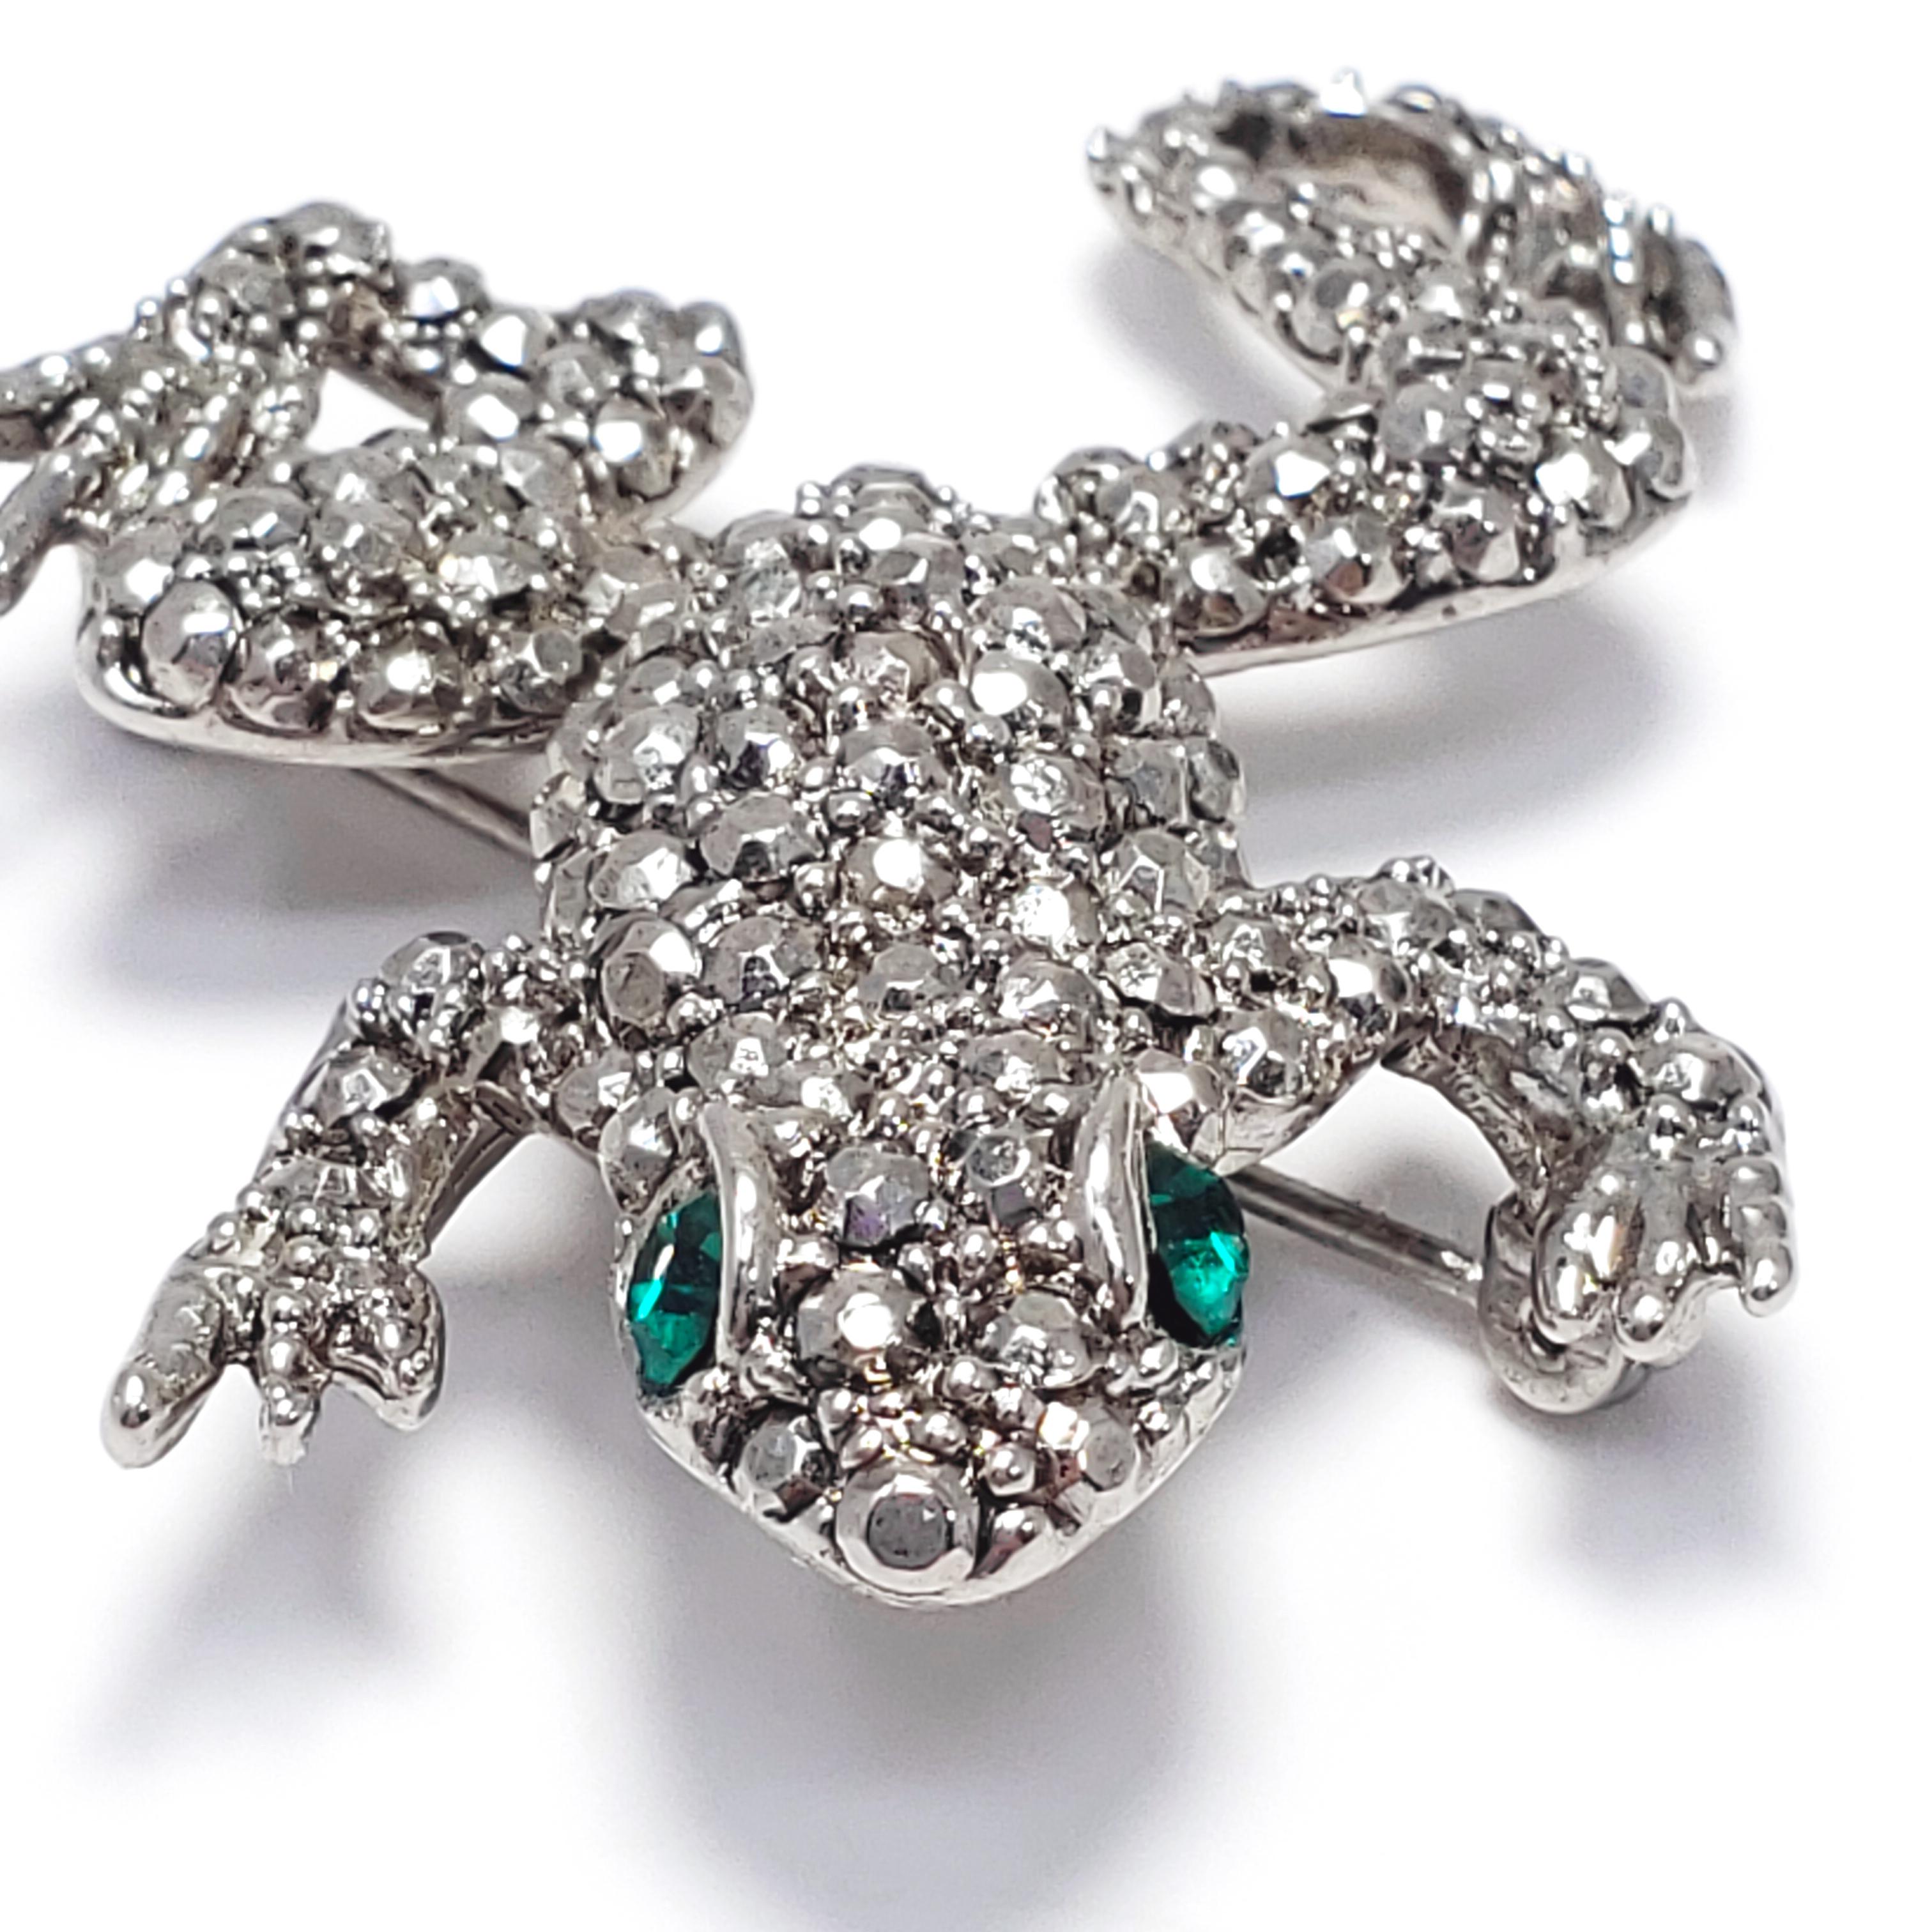 Women's or Men's Hobe Pave Marcasite and Silver Frog Brooch Pin, 1940s